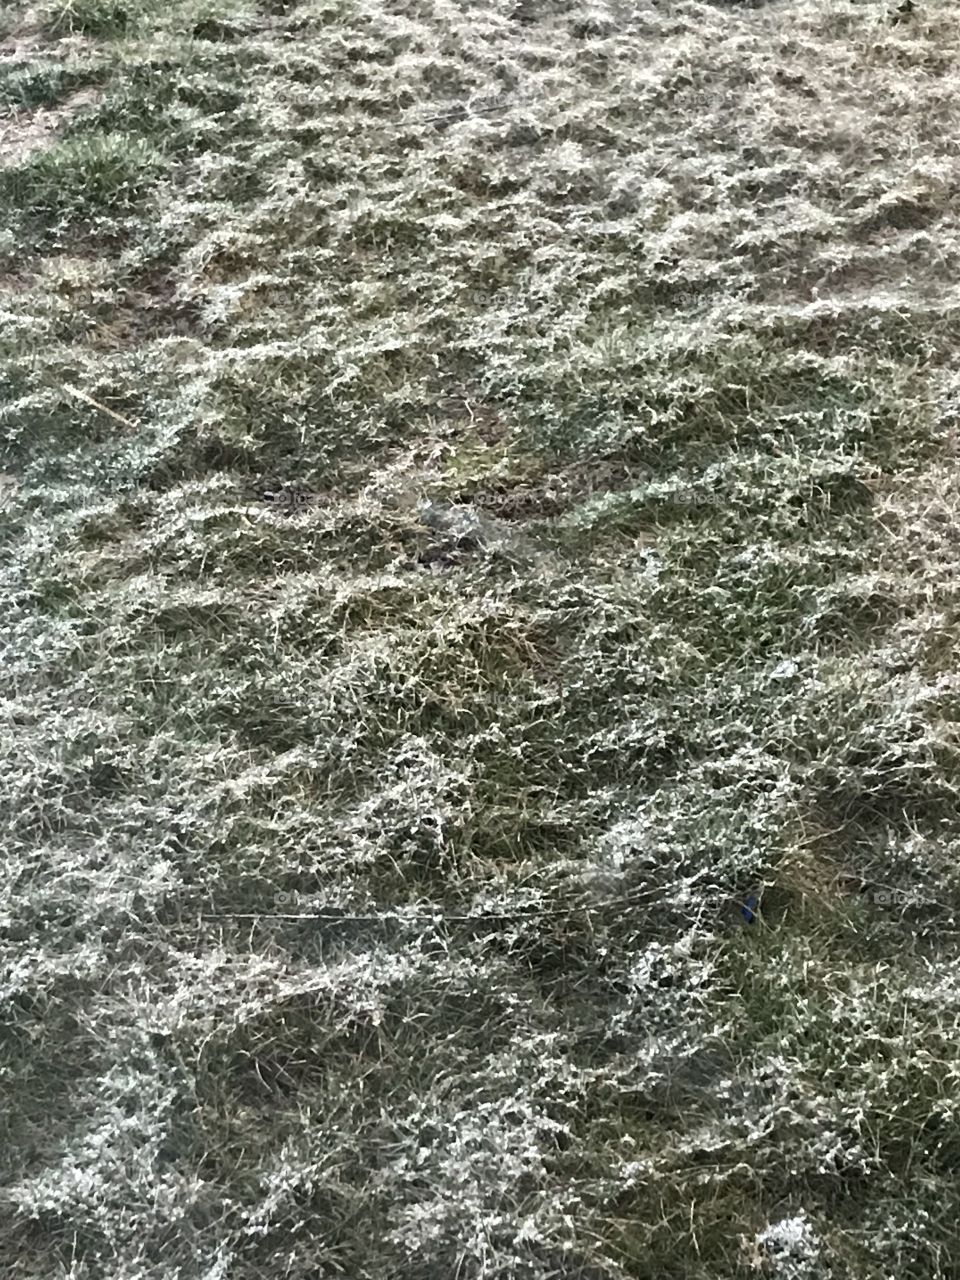 spring grass lightly dusted in a powdery layer of snow